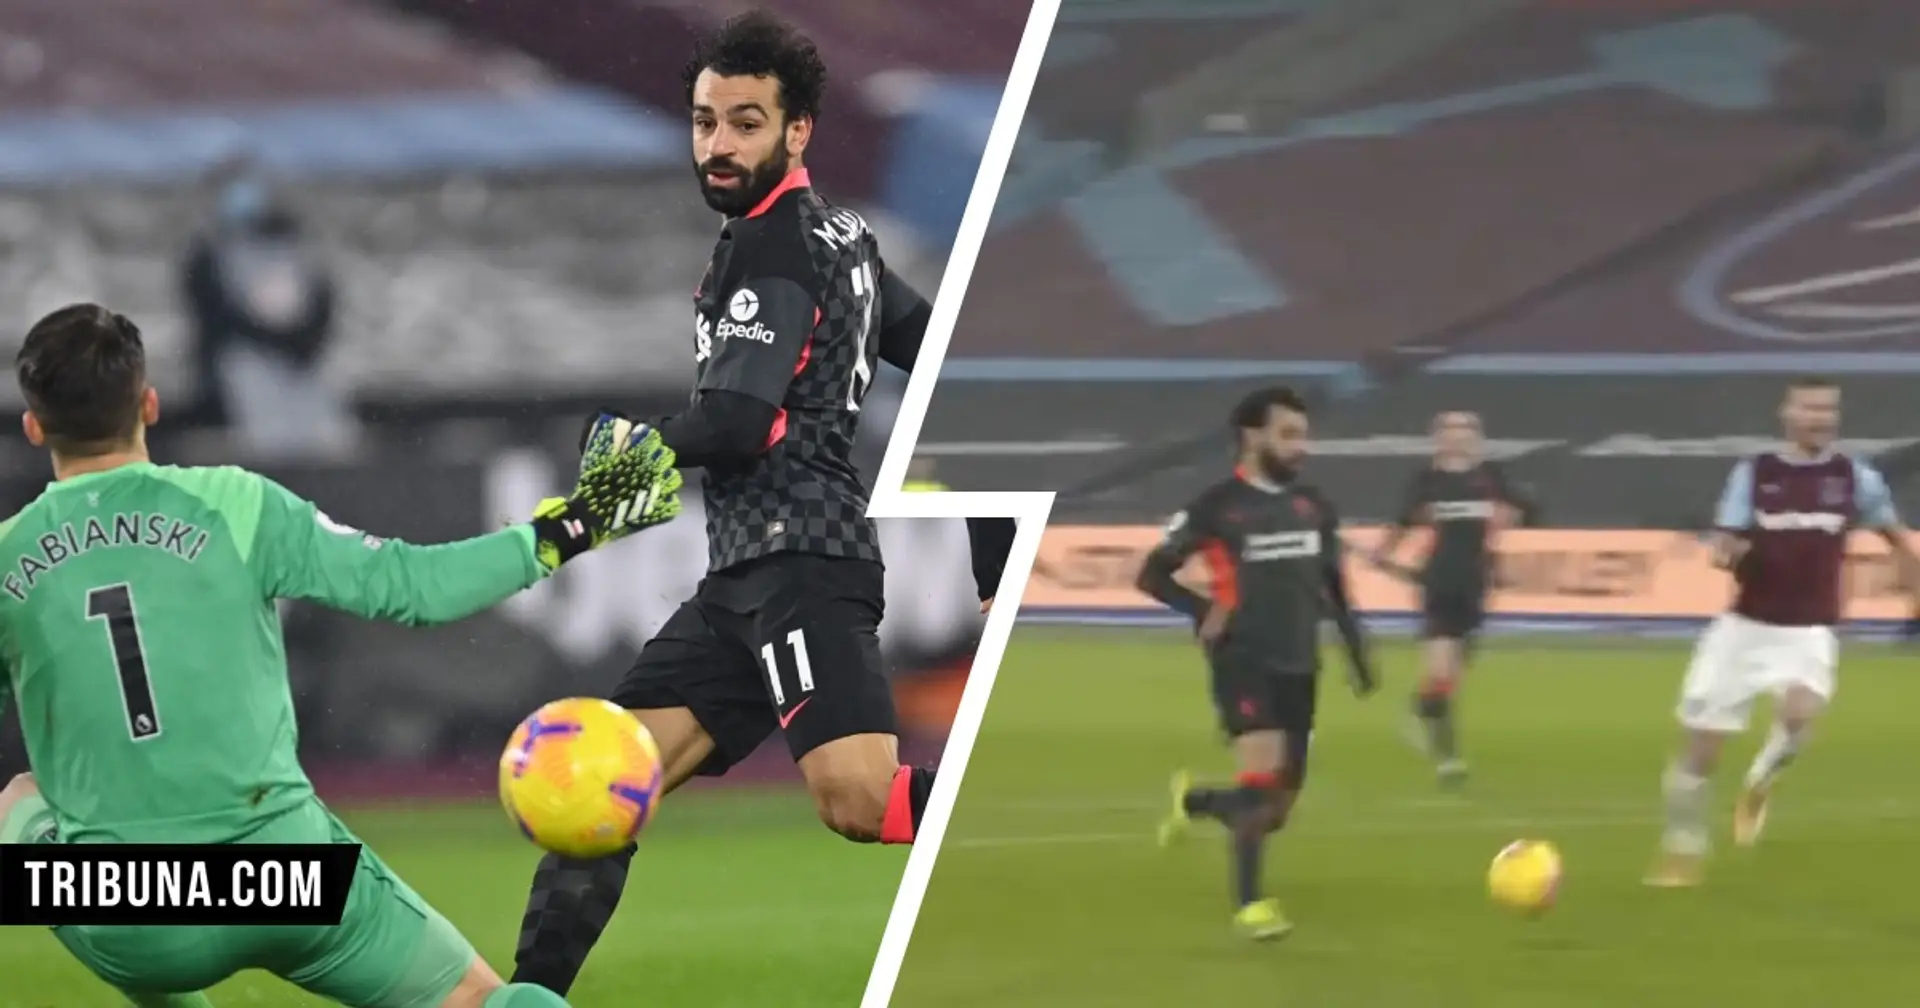 Mo Salah's 2nd vs West Ham in contention for PL goal of the month (video)